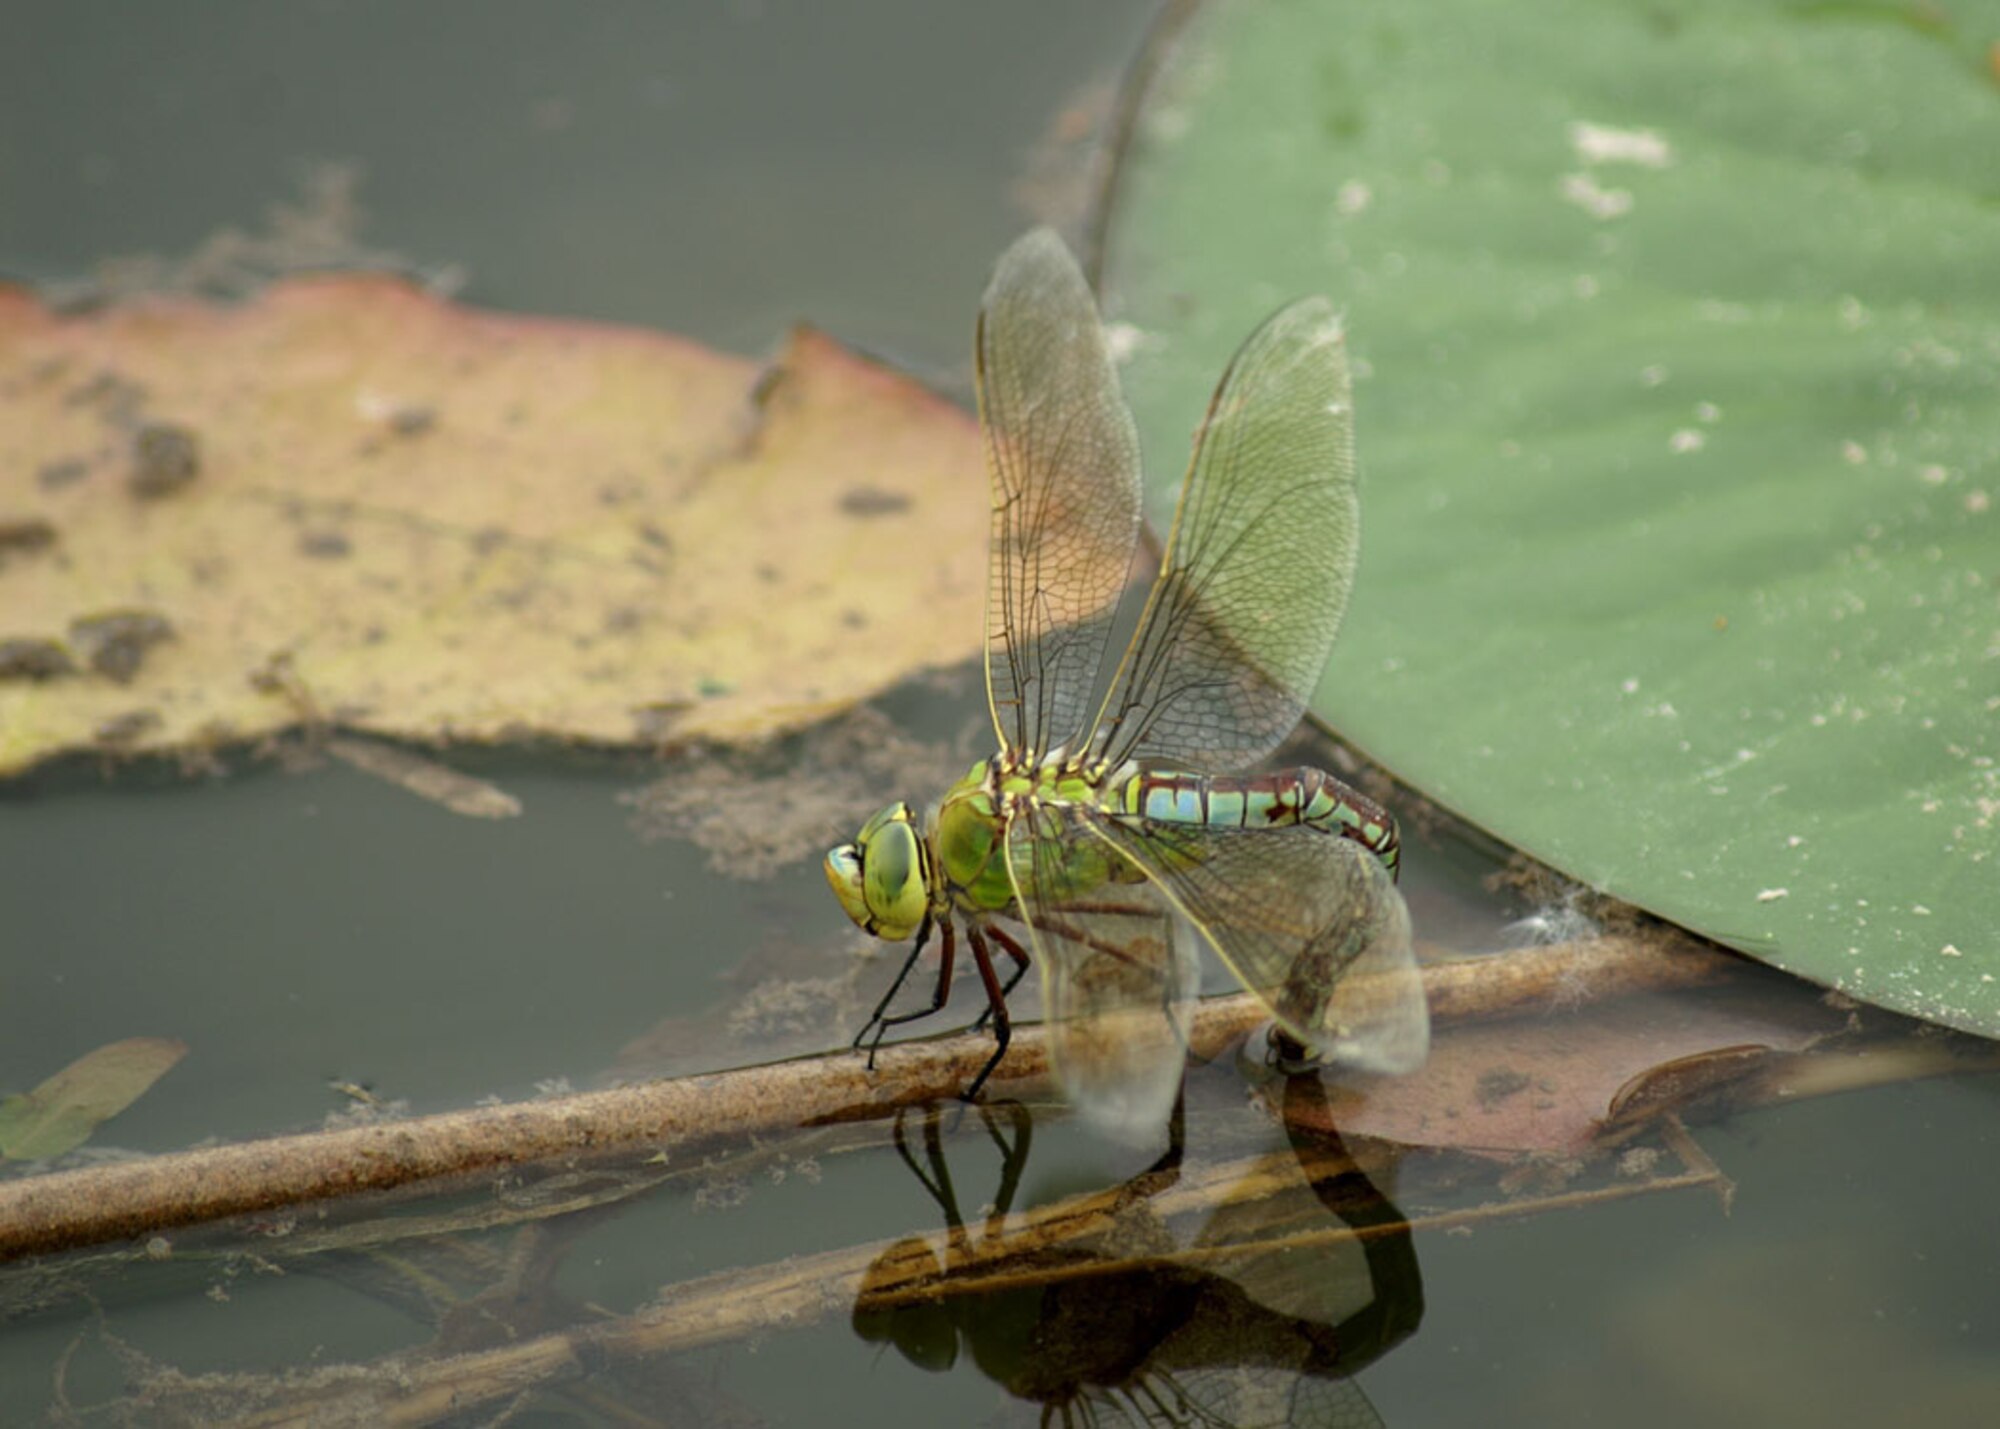 A dragonfly deposits her eggs in a pond at Wicken Fen, one of the oldest National Nature Reserves in the United Kingdom. (U.S. Air Force photo by Judith Wakelam)